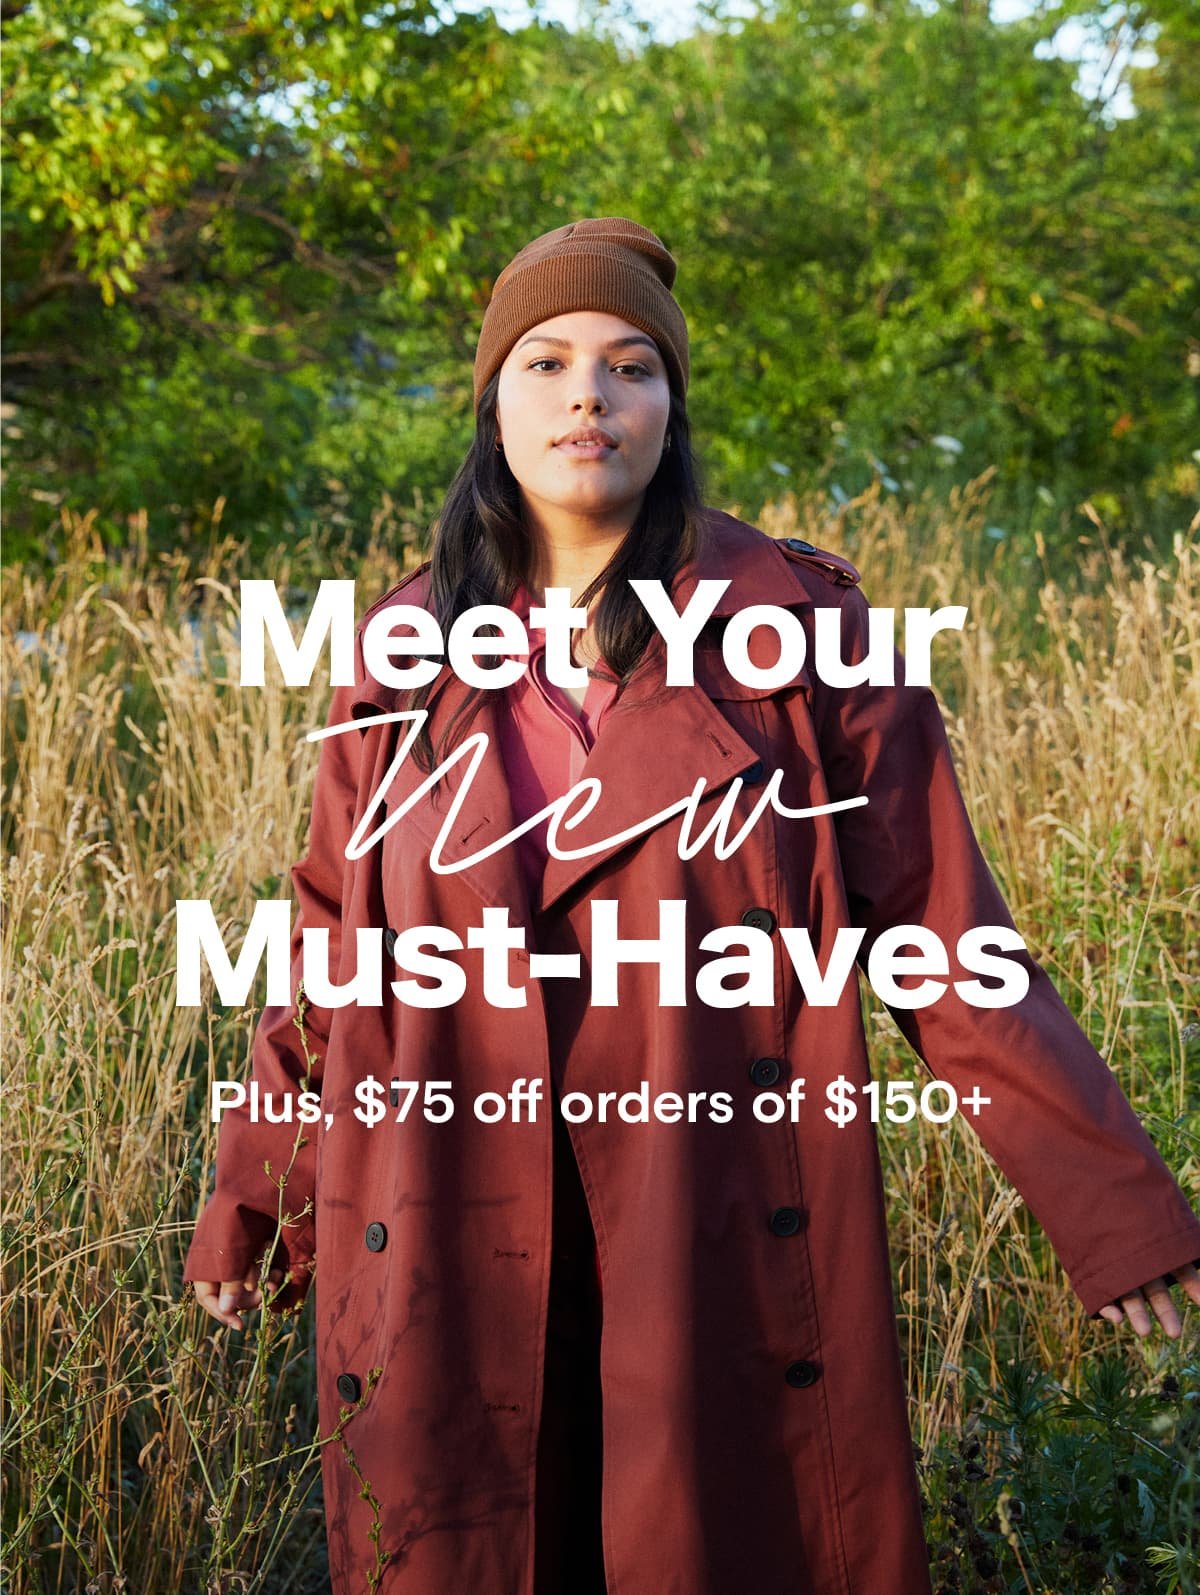 Meet Your New Must-Haves Plus, $75 off orders of $150+